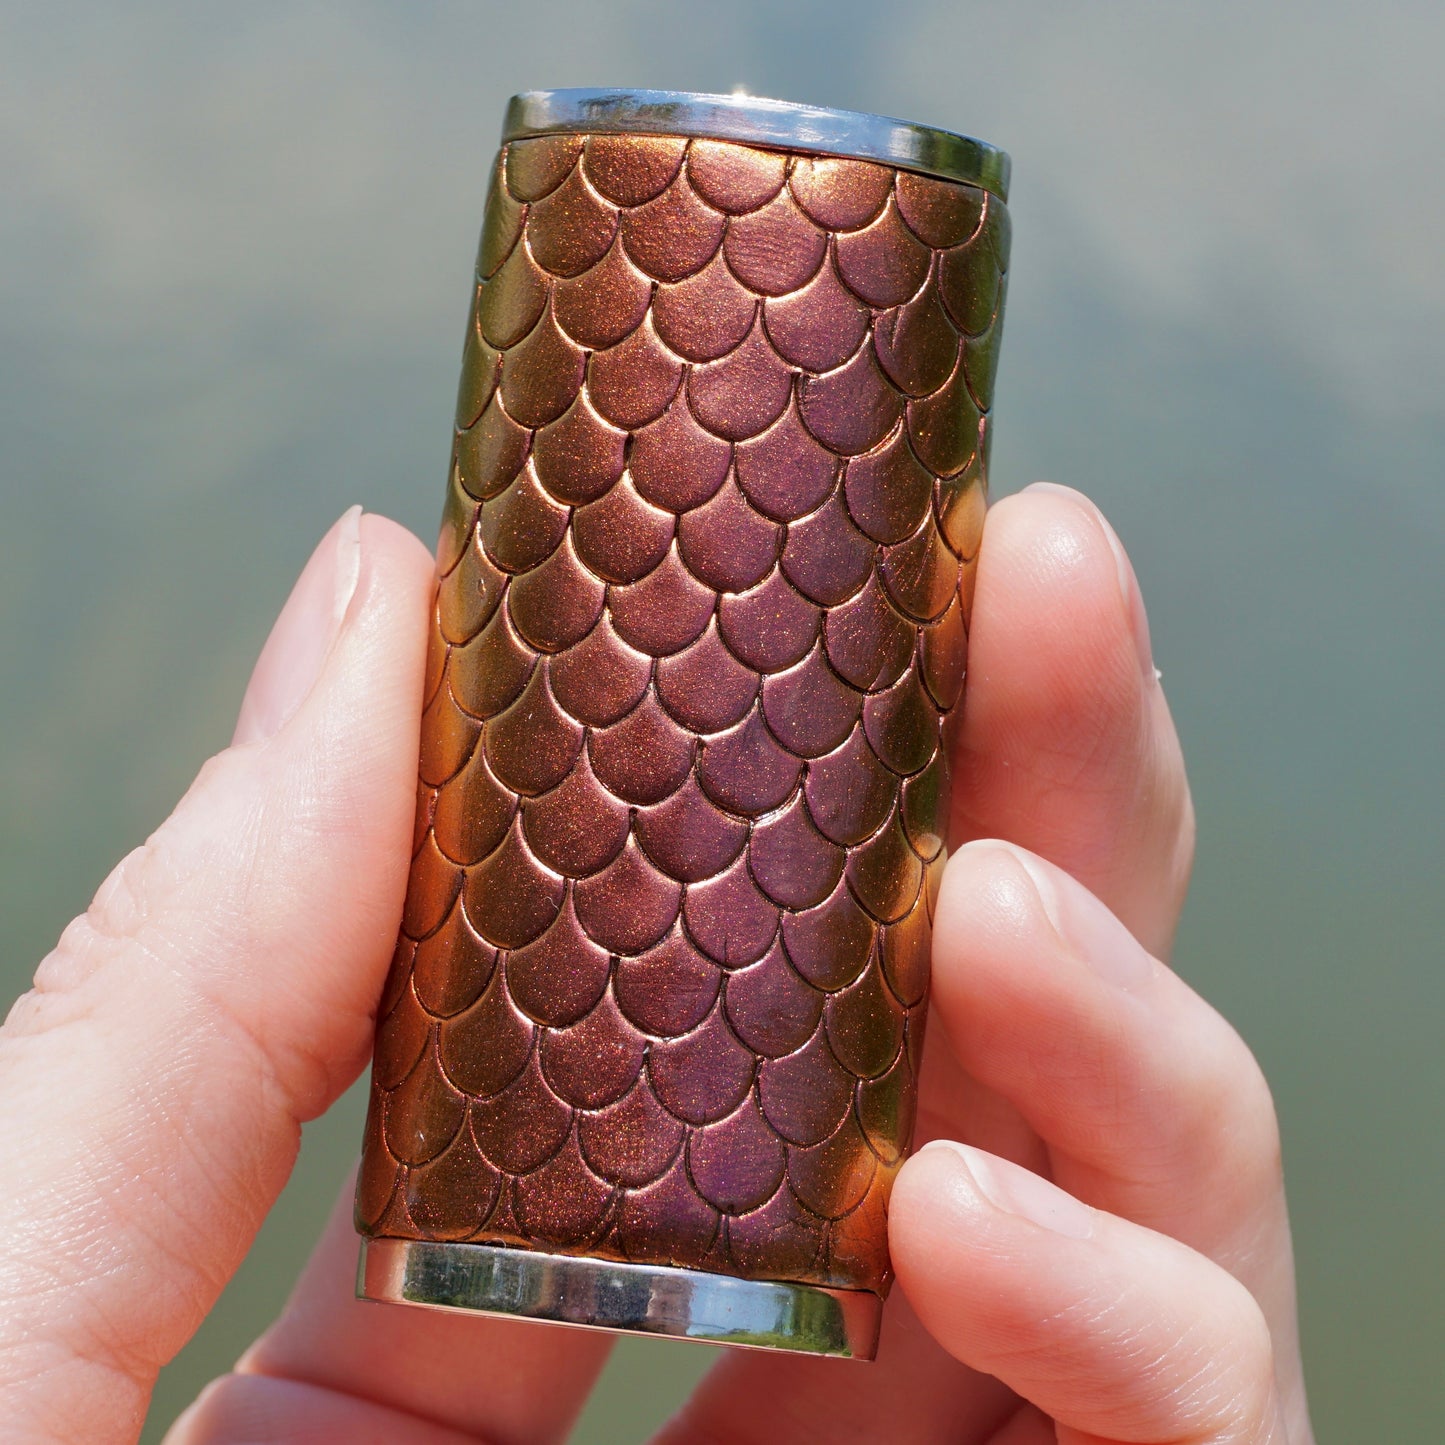 Iridescent Mermaid Scale Lighter Cover